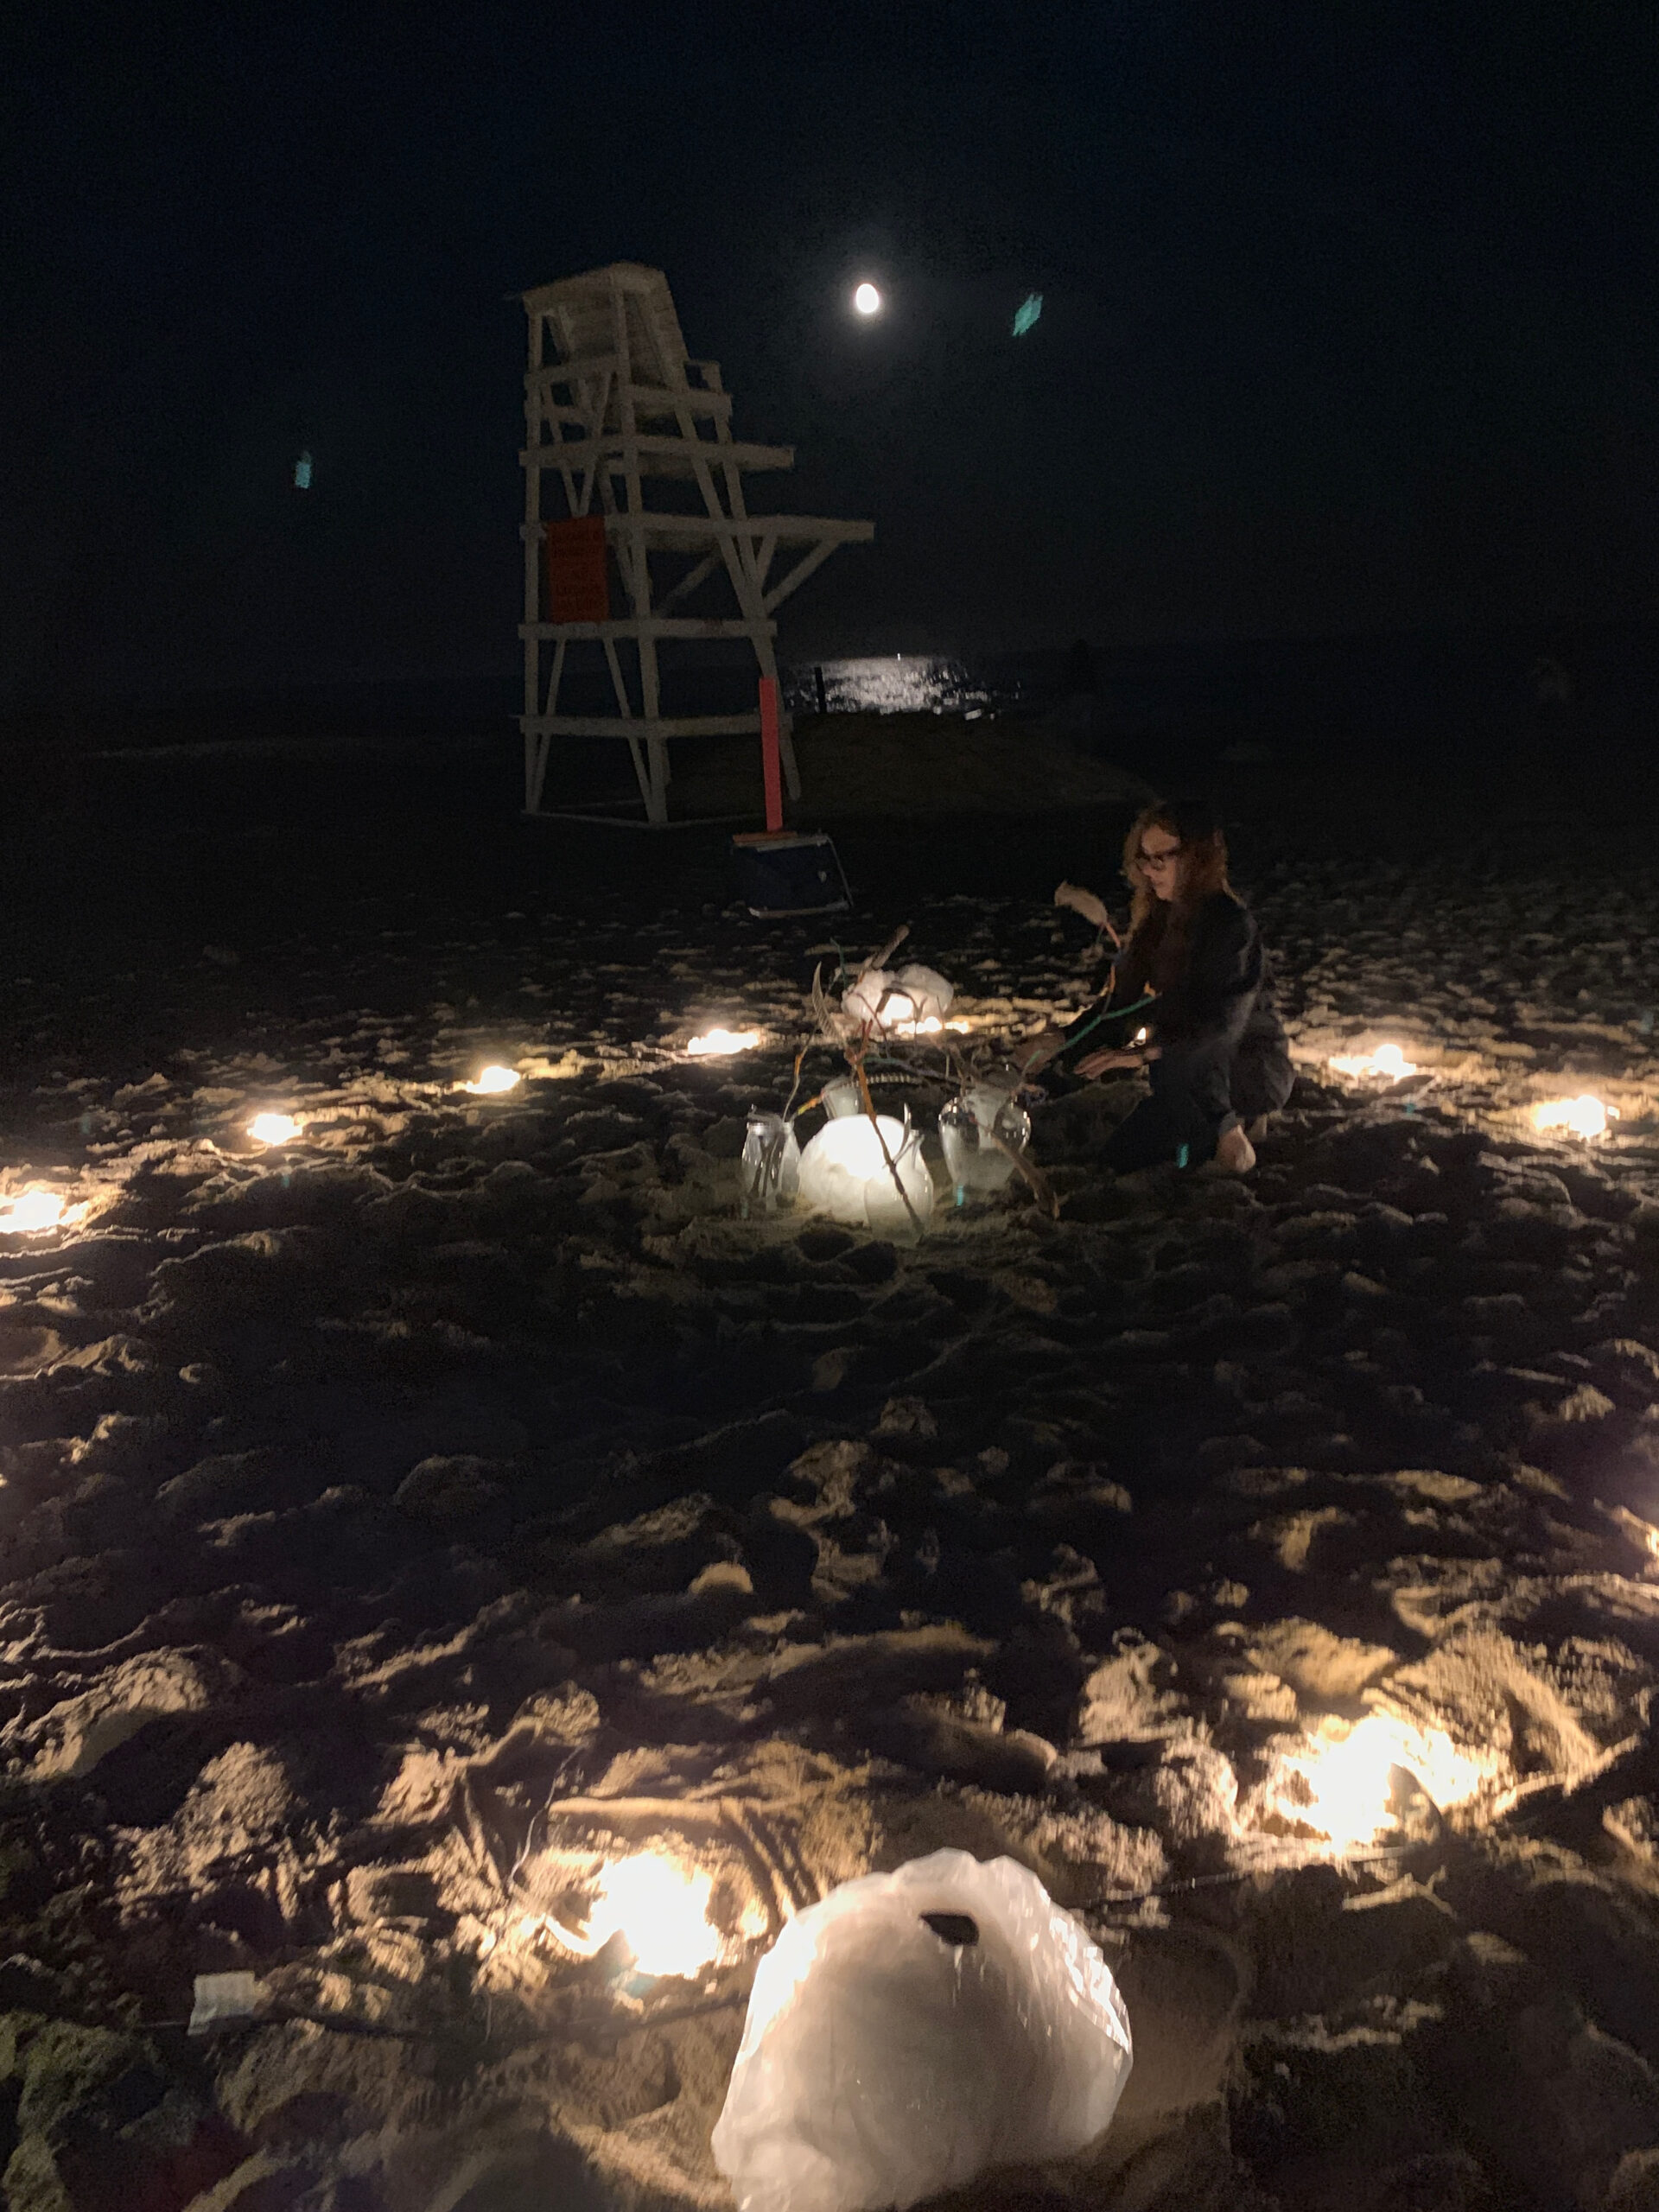 Artist Elana Bajo prepares an art piece under the full moon at East Hampton's Main Beach on September 10 in response  to a musical love letter from West Coast artist Jasmine Orpilla. ANNETTE HINKLE